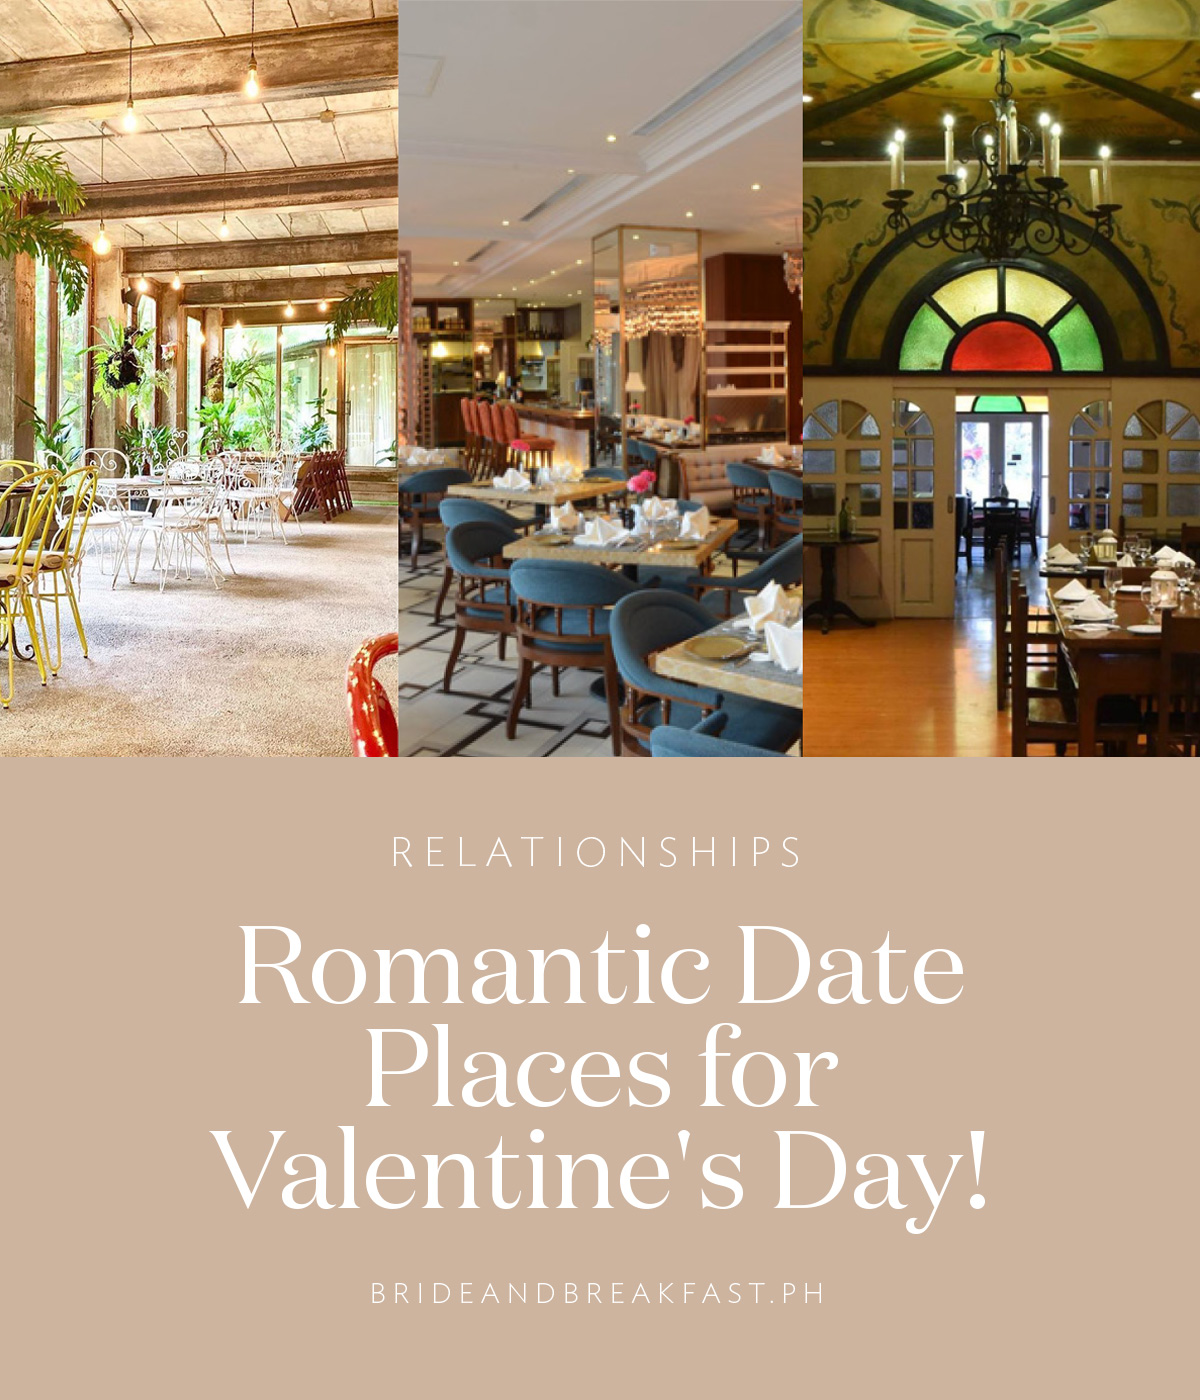 Romantic Date Places for Valentine's Day!